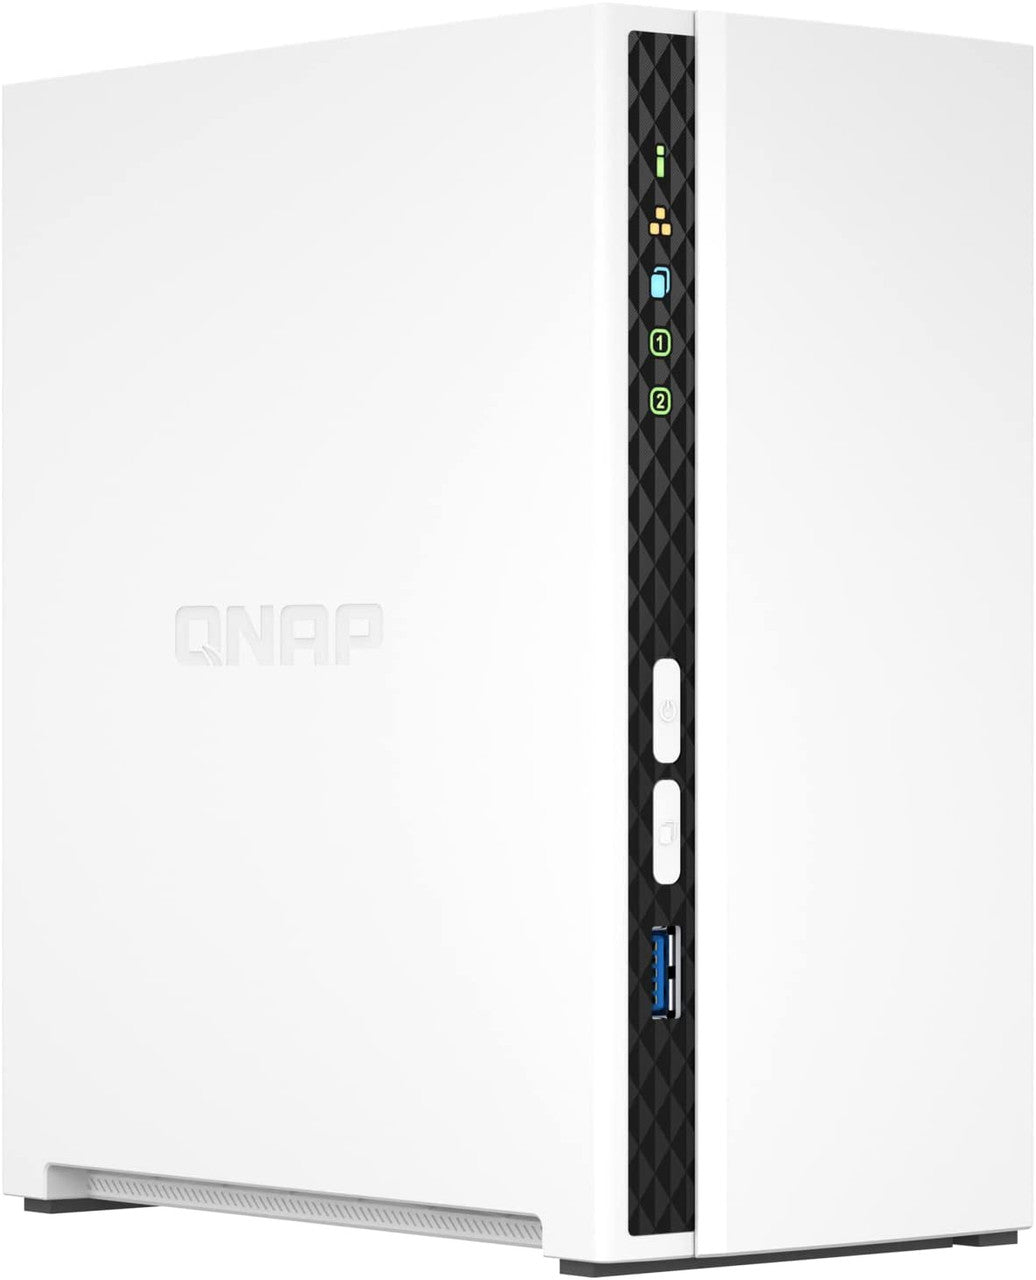 QNAP TS-233 2-Bay Desktop NAS with a 16TB (2 x 8TB) of Seagate Ironwolf NAS Drives Fully Assembled and Tested